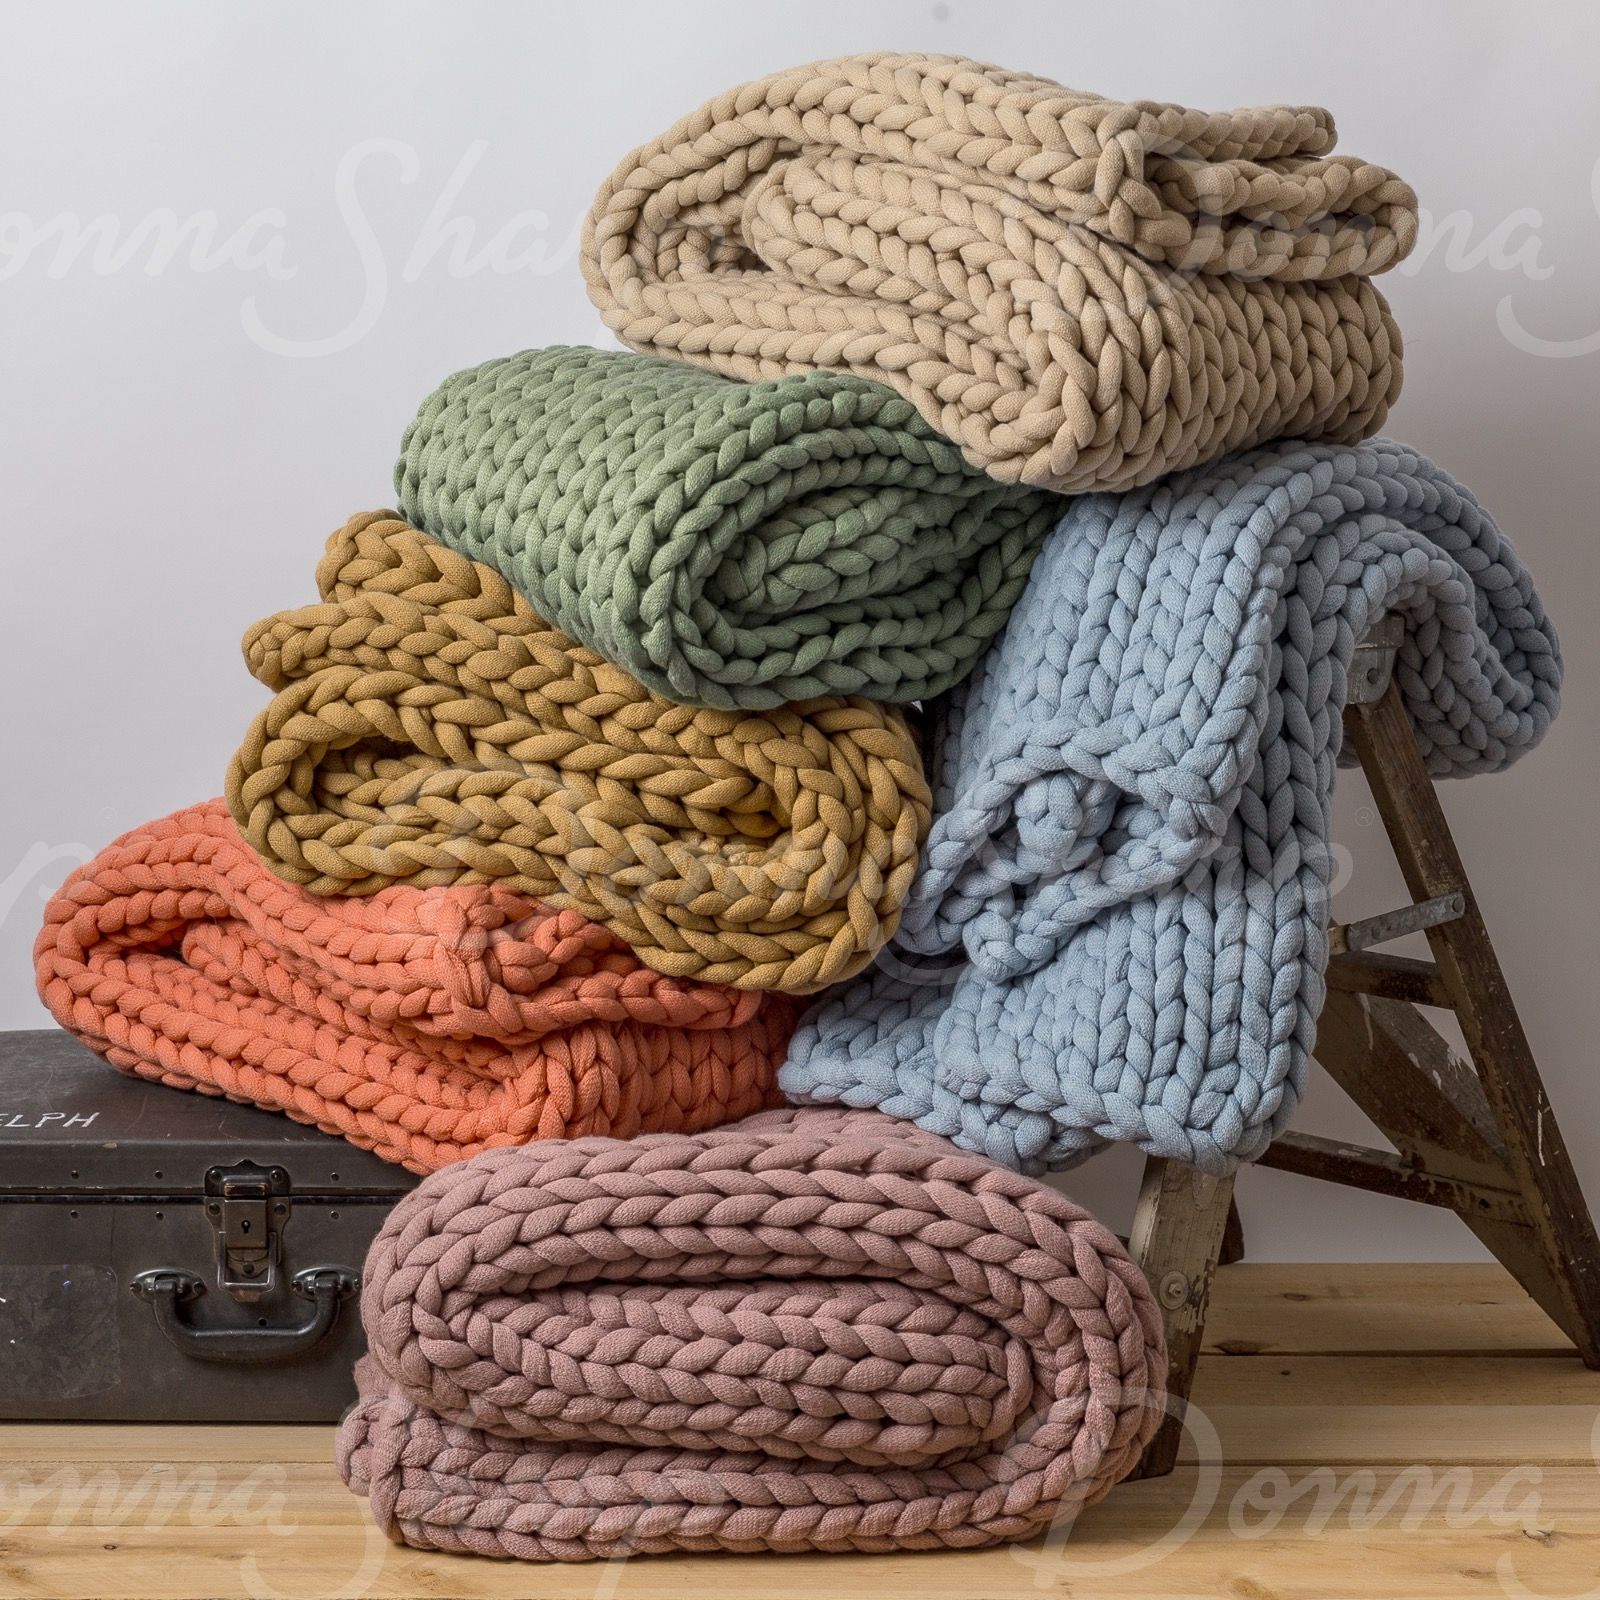 Title: Chunky Knit Throws by Donna Sharp - Luxurious Acrylic Blankets for  Cozy Home Decor